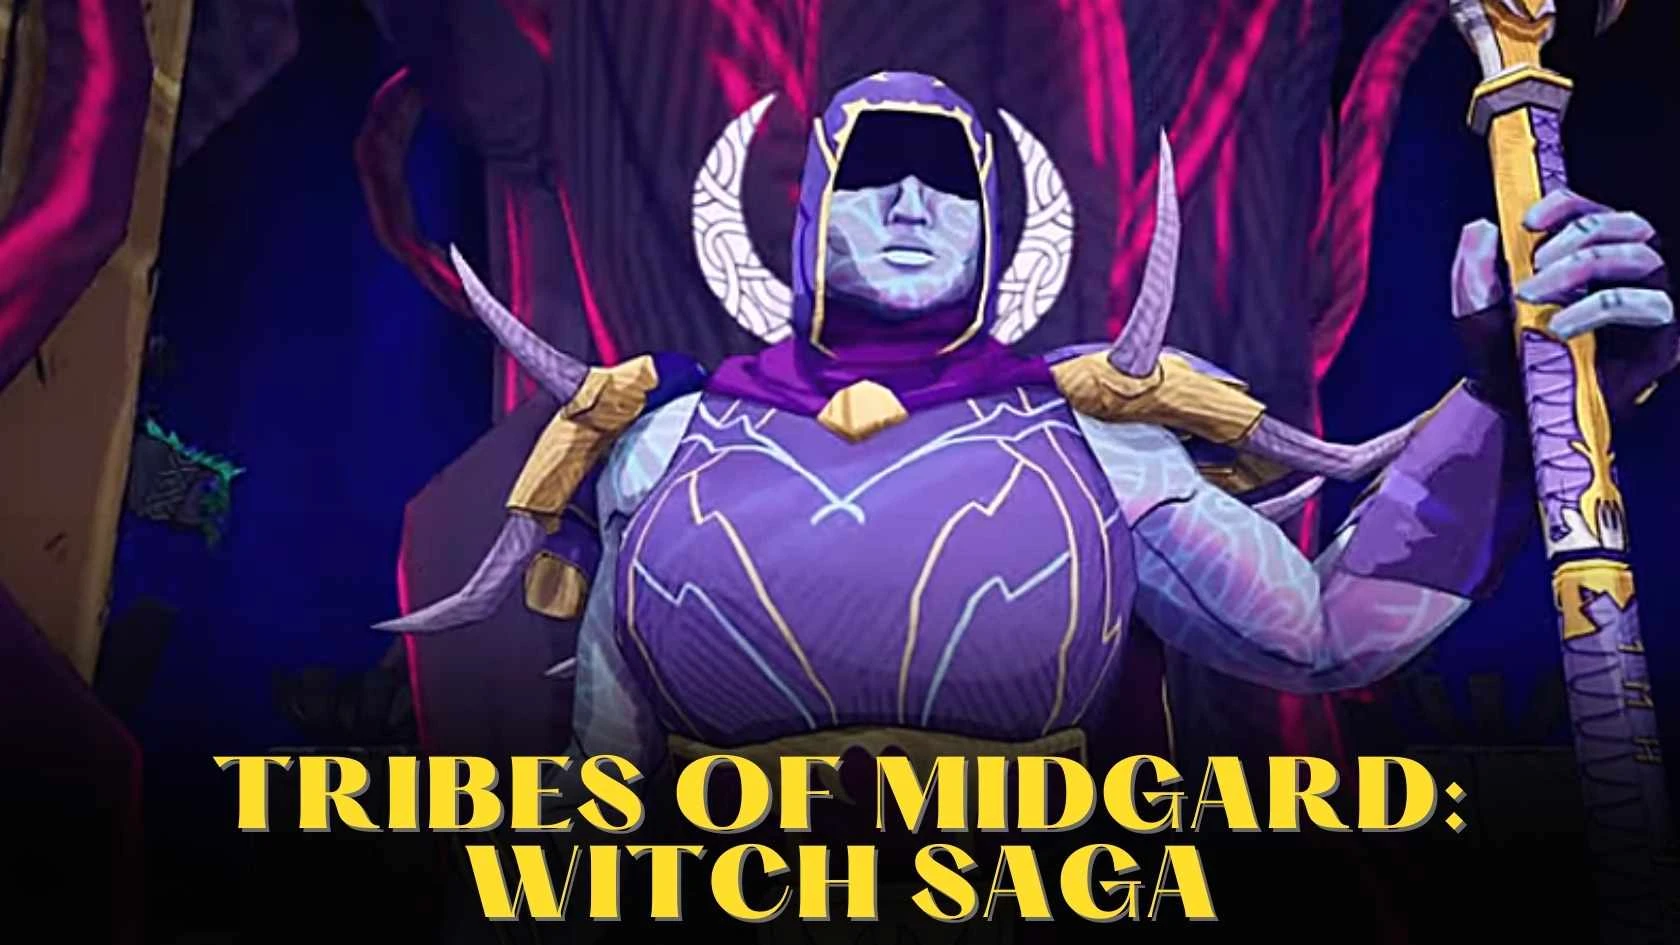 Tribes of Midgard Witch Saga Parents Guide and Age Rating